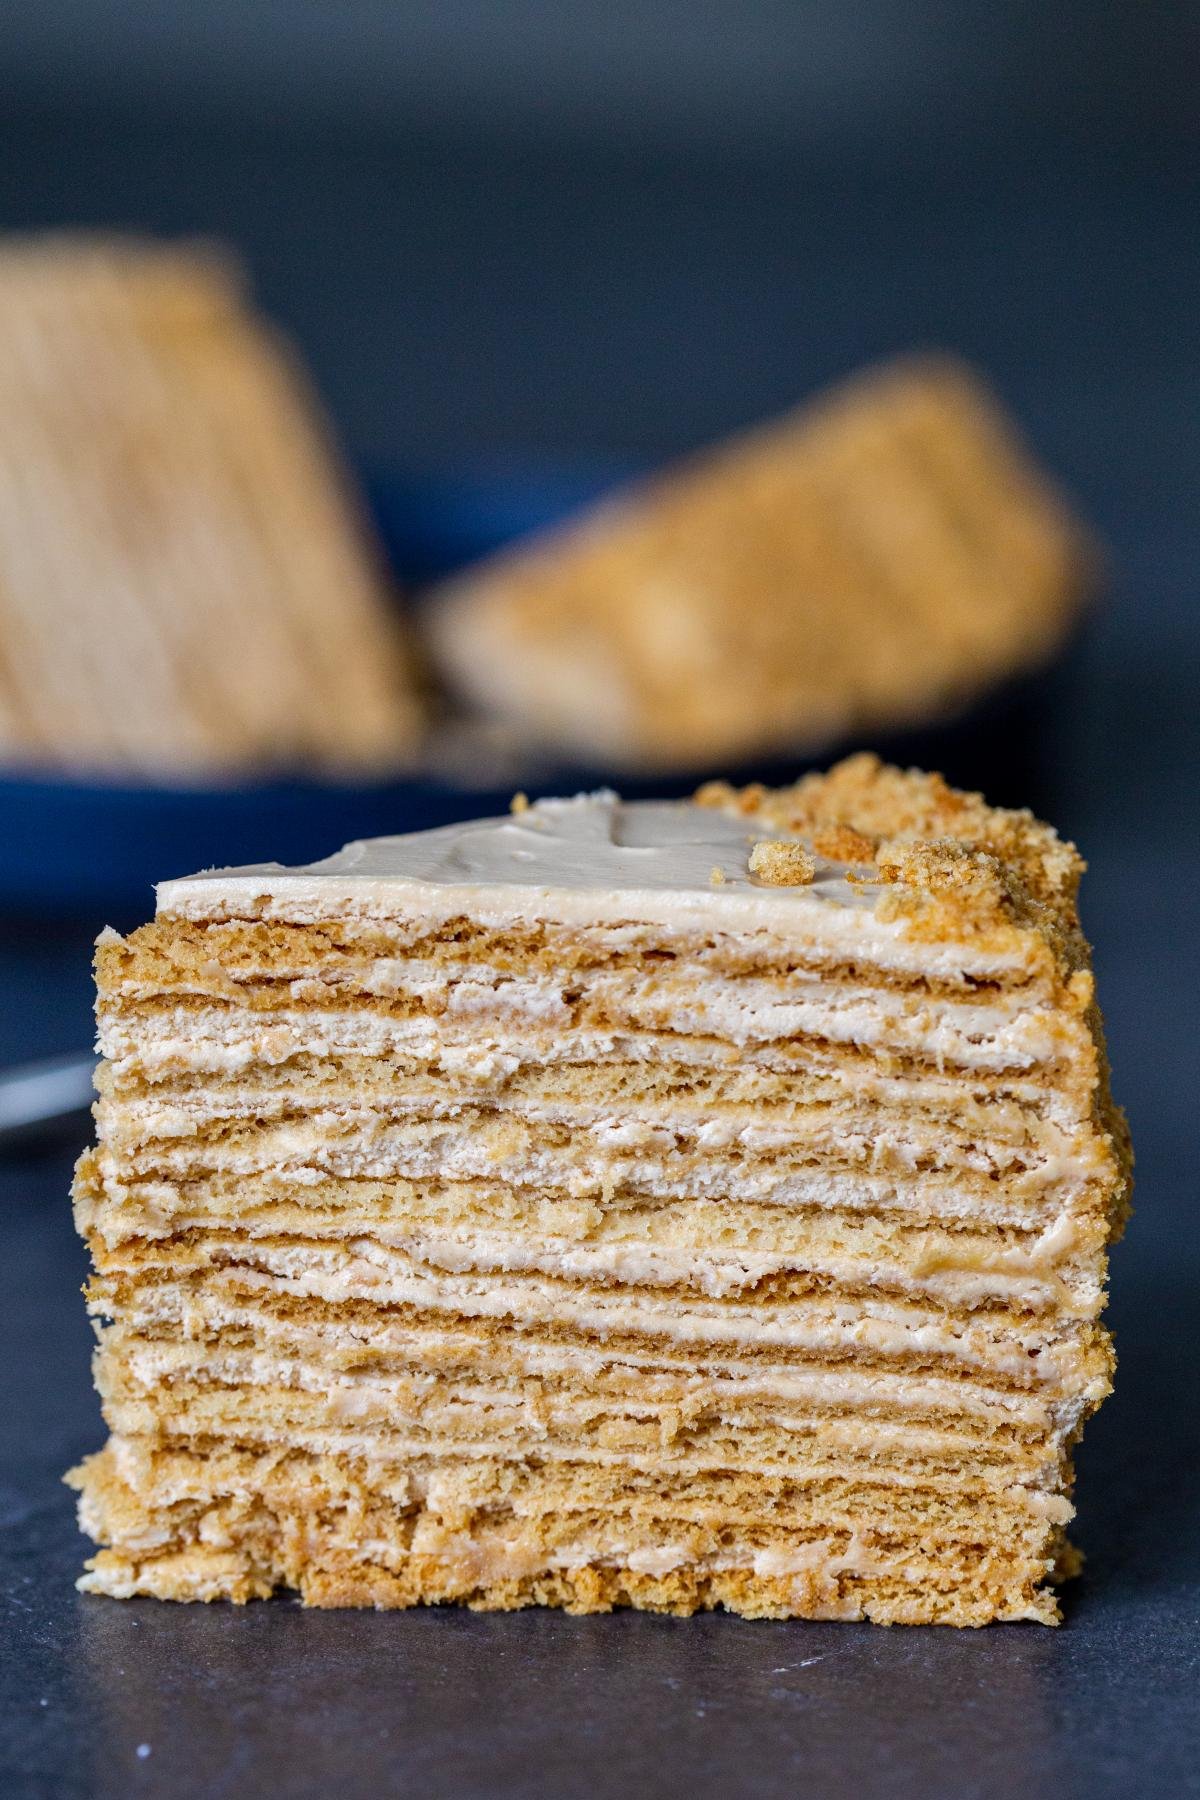 Multilayered Russian honey cake | Two Spoons